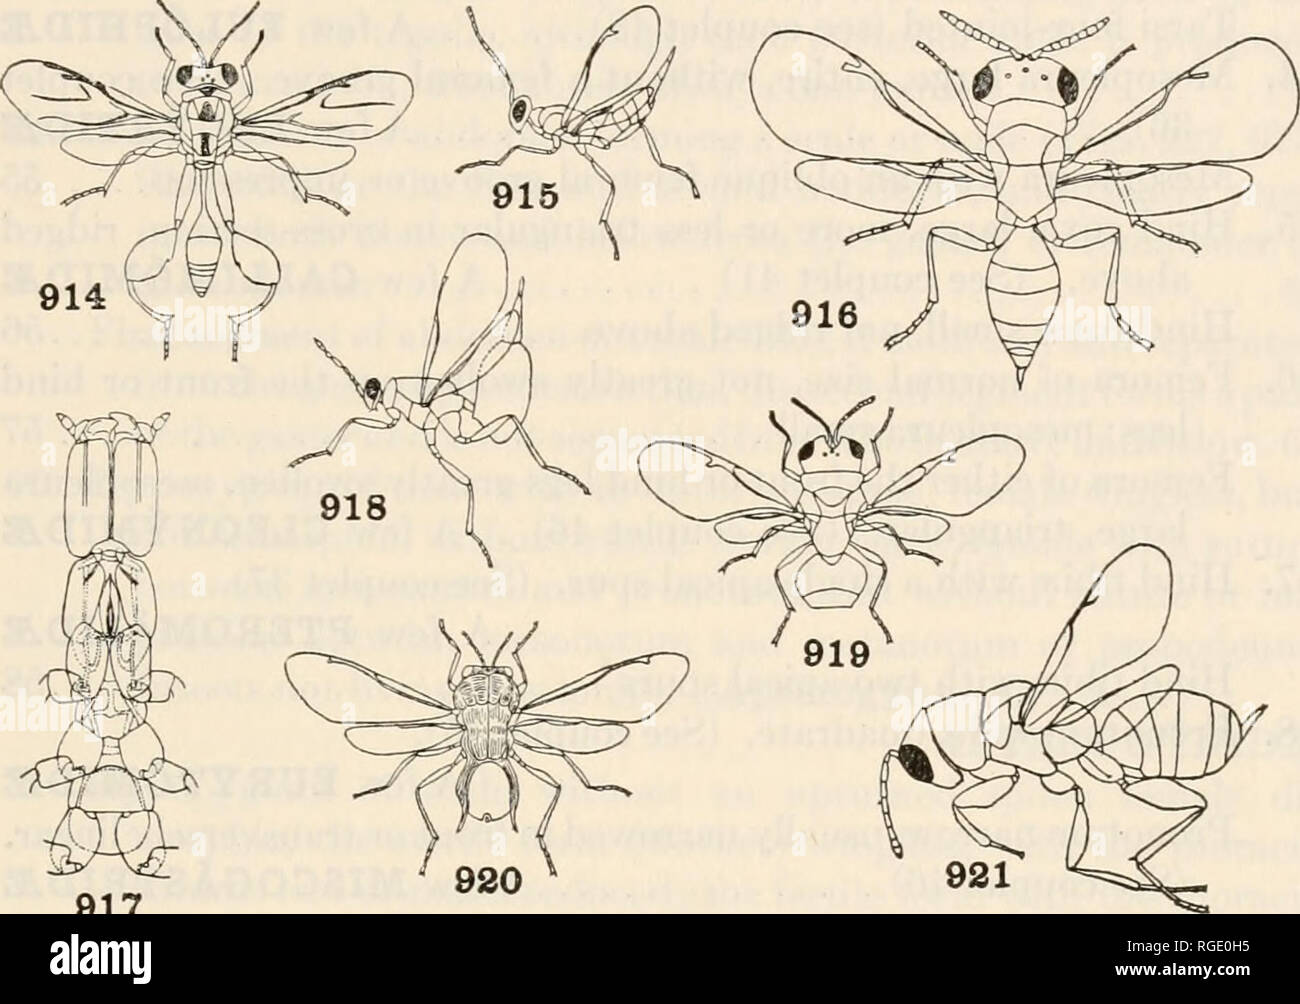 . Bulletin of the Museum of Comparative Zoology at Harvard College. Zoology. BRUES AND MELANDER: CLASSIFICATION OF INSECTS 48/ 49. Antennae distinctly elbowed, the scape long and the flagellum generally swollen toward the tip (Figs. 909, 912, 913) 50 Antennae not elbowed, usually filiform or tapering toward the tip 59. 917 Figs. 914-921. Hymenoptera 914. Xanthomelanus (Ashmead) Chalcididae. 915. Trigonoderus (Ashmead) Cleonymidae. 916. Bruchophagus (Urbahns) Eurytomidae. 917. Sycophaga, underside of head and thorax (Grandi) Agaontidse. 918. Paracrias (Ashmead) Eulophidae. 919. Perilampus (Ashm Stock Photo